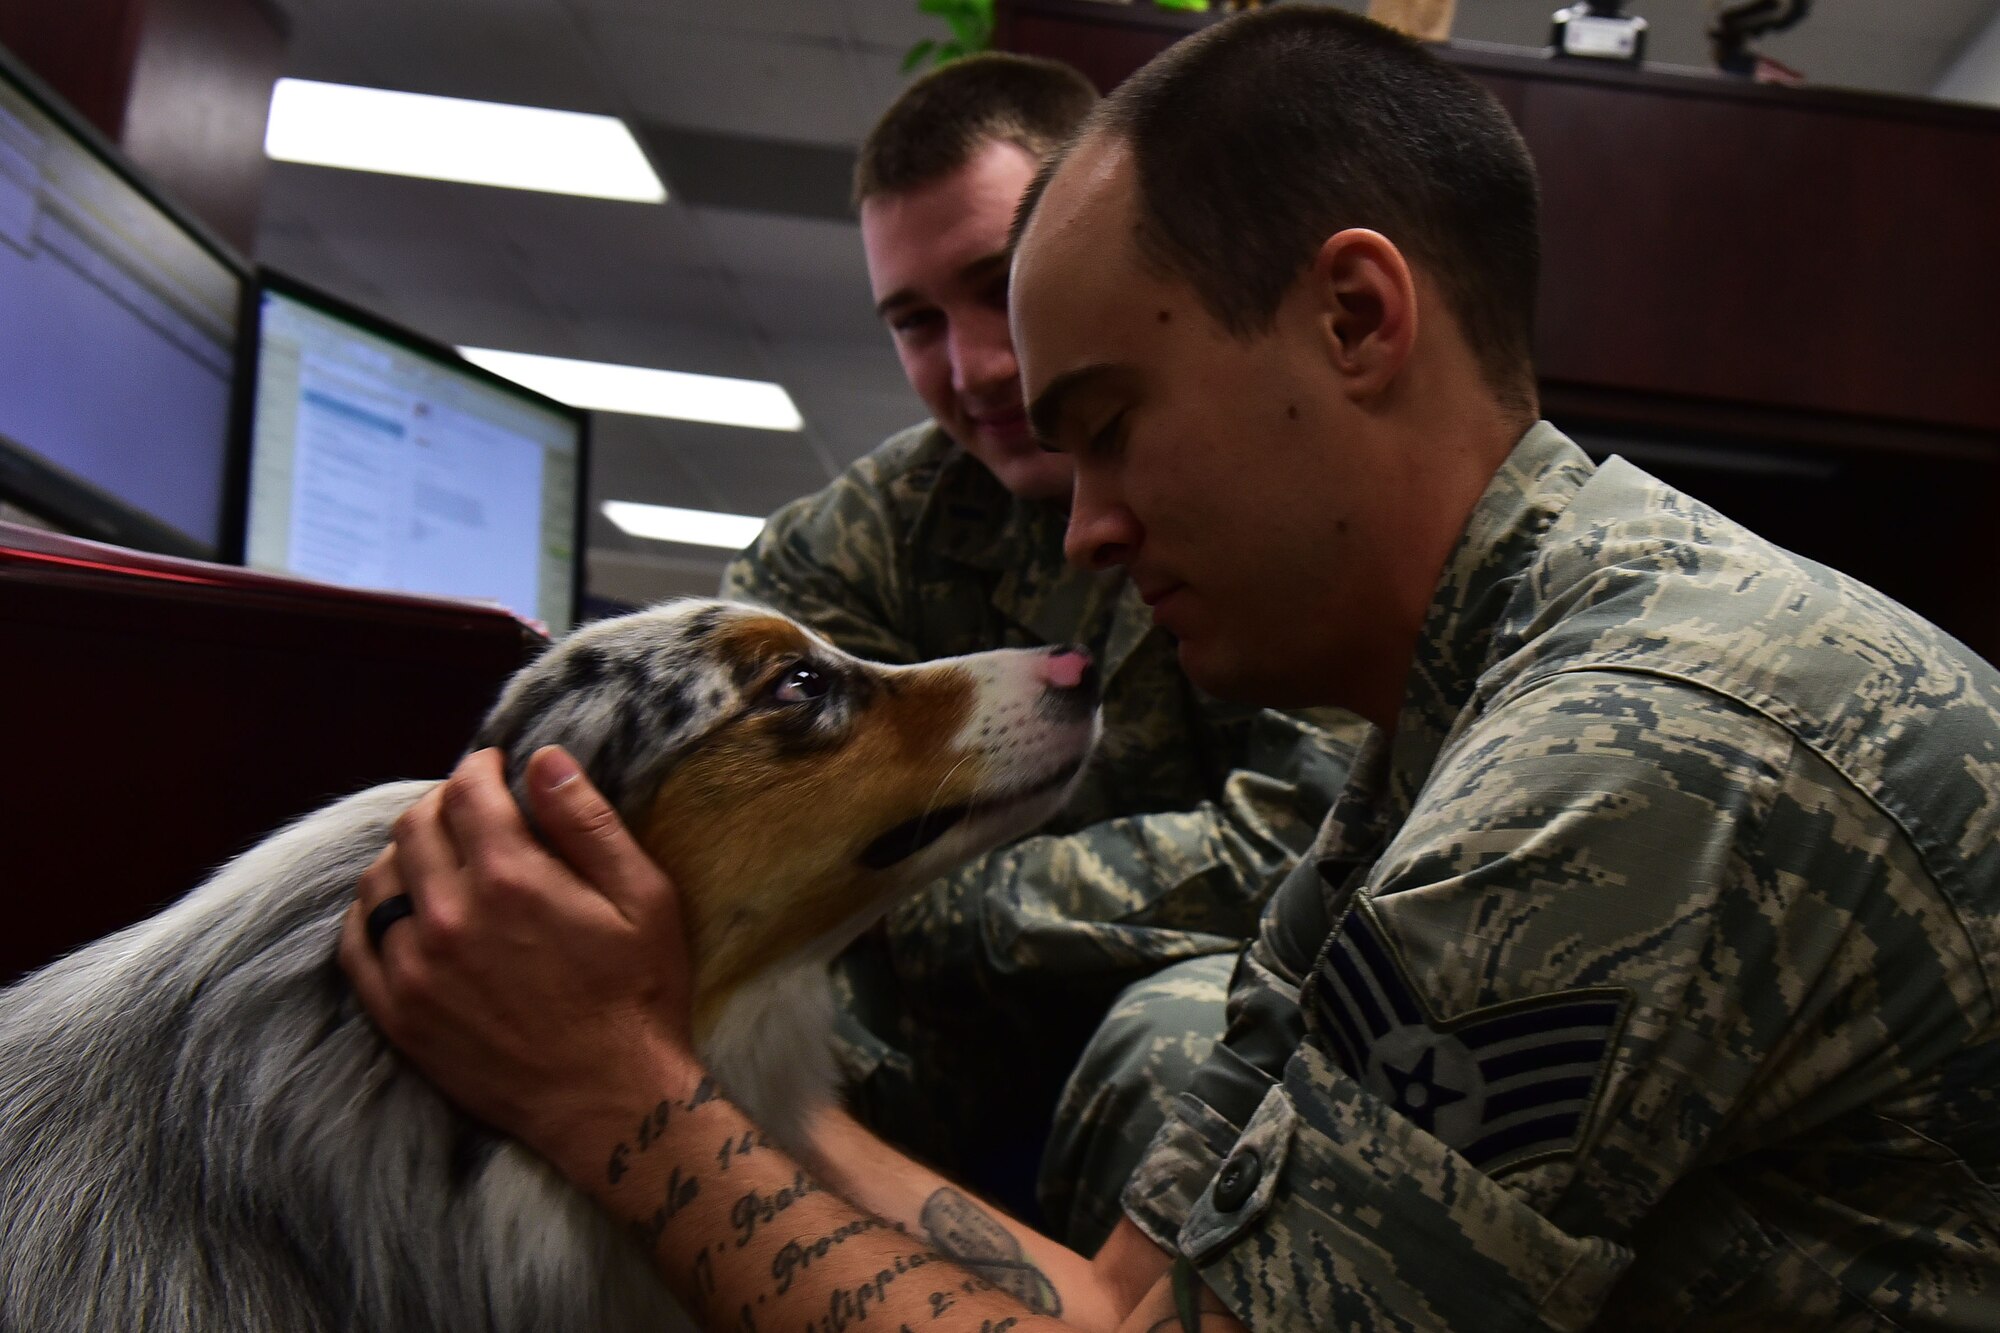 Staff Sgt. Gregory Corbitt, 19th Force Support Squadron NCO in charge of reenlistments and extensions, pets Milo, 19th Airlift Wing morale dog, Sept. 21, 2017, at Little Rock Air Force Base, Ark. Milo went through several offices that day to increase morale and help Airmen express themselves around chaplains and chapel staff members. (U.S. Air Force photo by Airman Rhett Isbell)